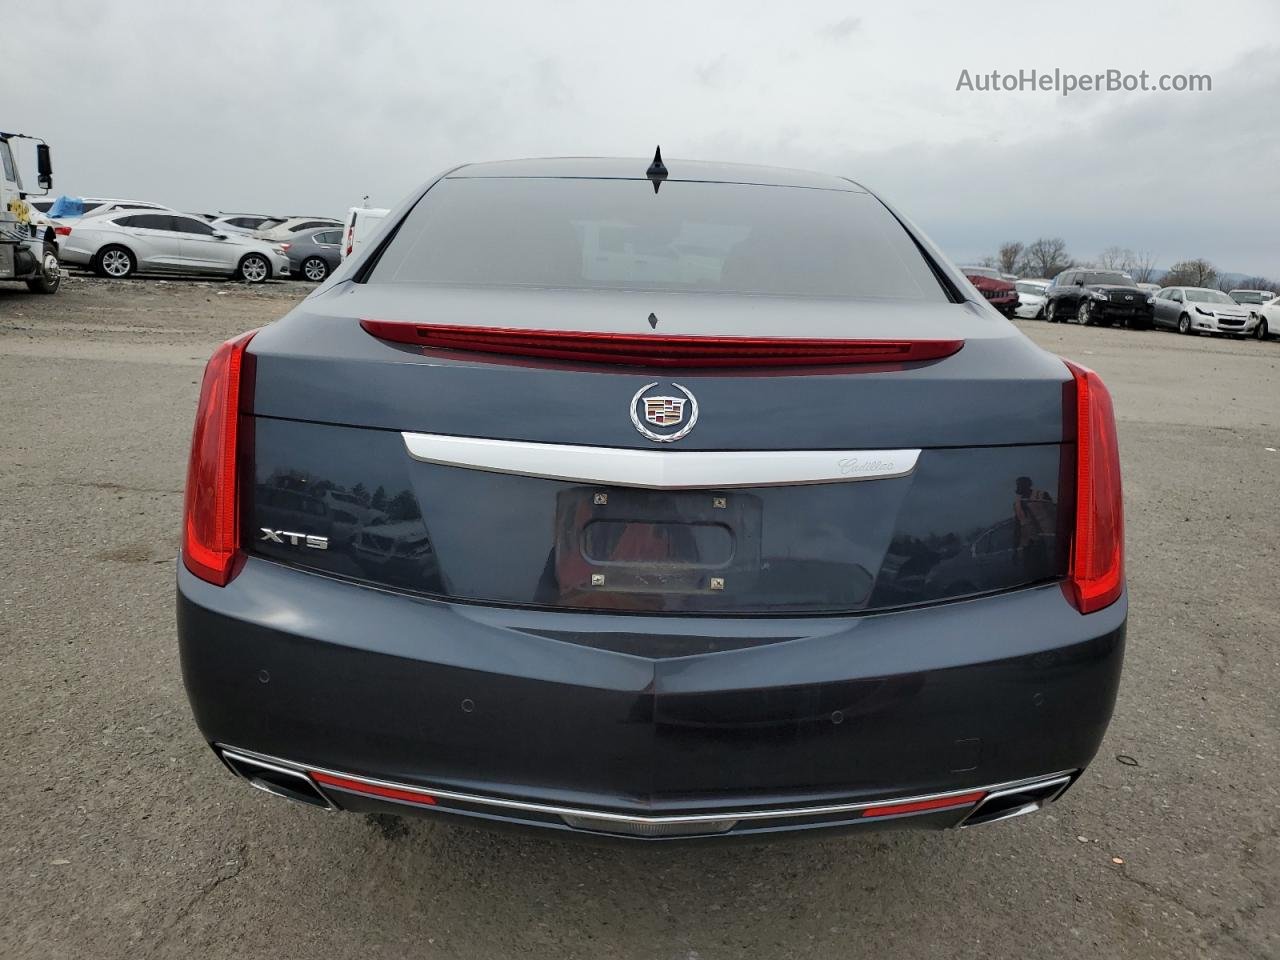 2013 Cadillac Xts Luxury Collection Blue vin: 2G61P5S35D9158000